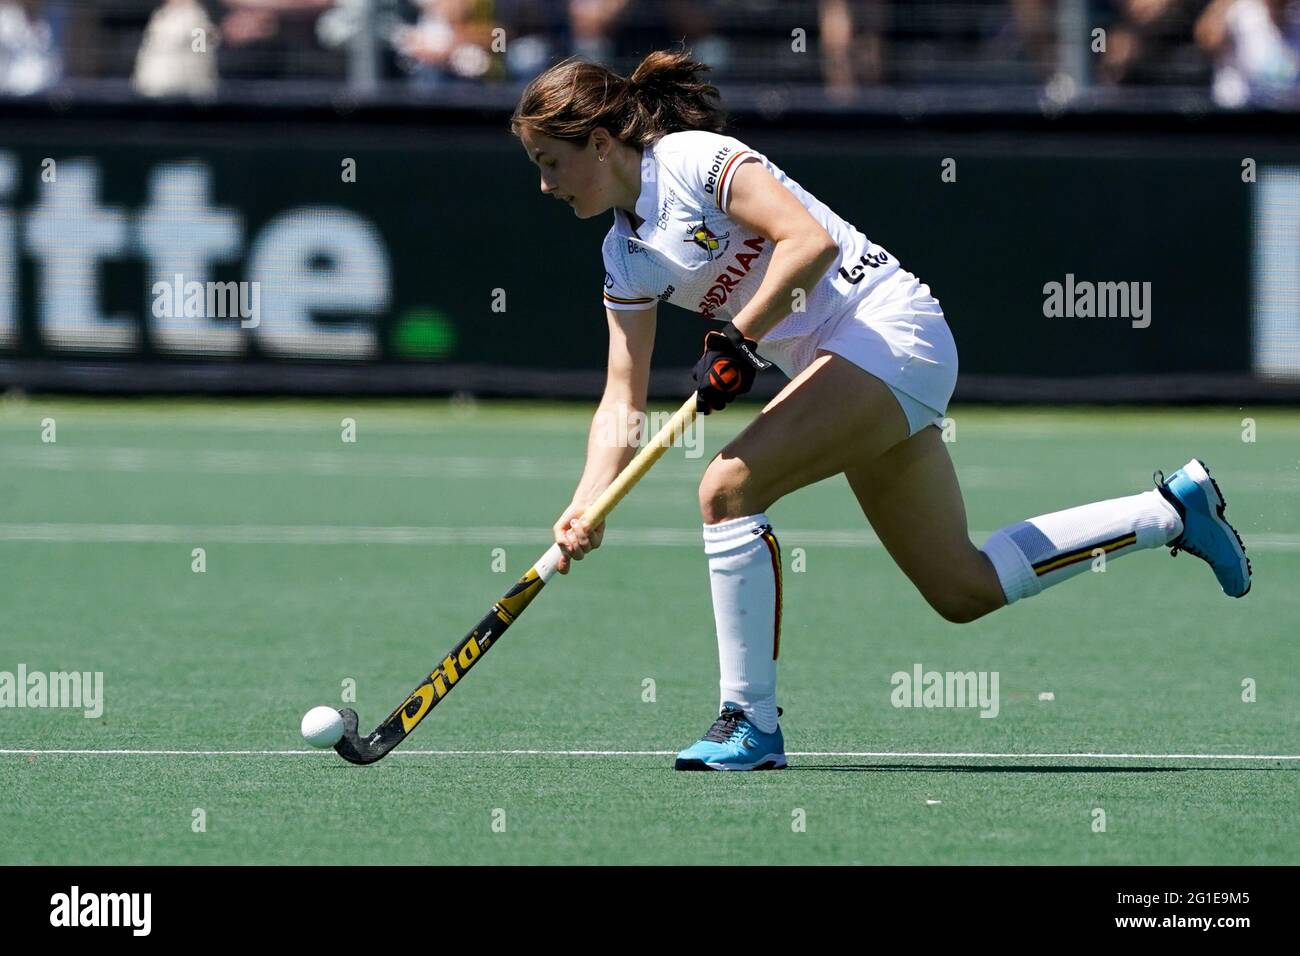 AMSTELVEEN, NETHERLANDS - JUNE 6: Tiphaine Dusquesne of Belgium during the Euro Hockey Championships match between Duitsland and Belgie at Wagener Sta Stock Photo